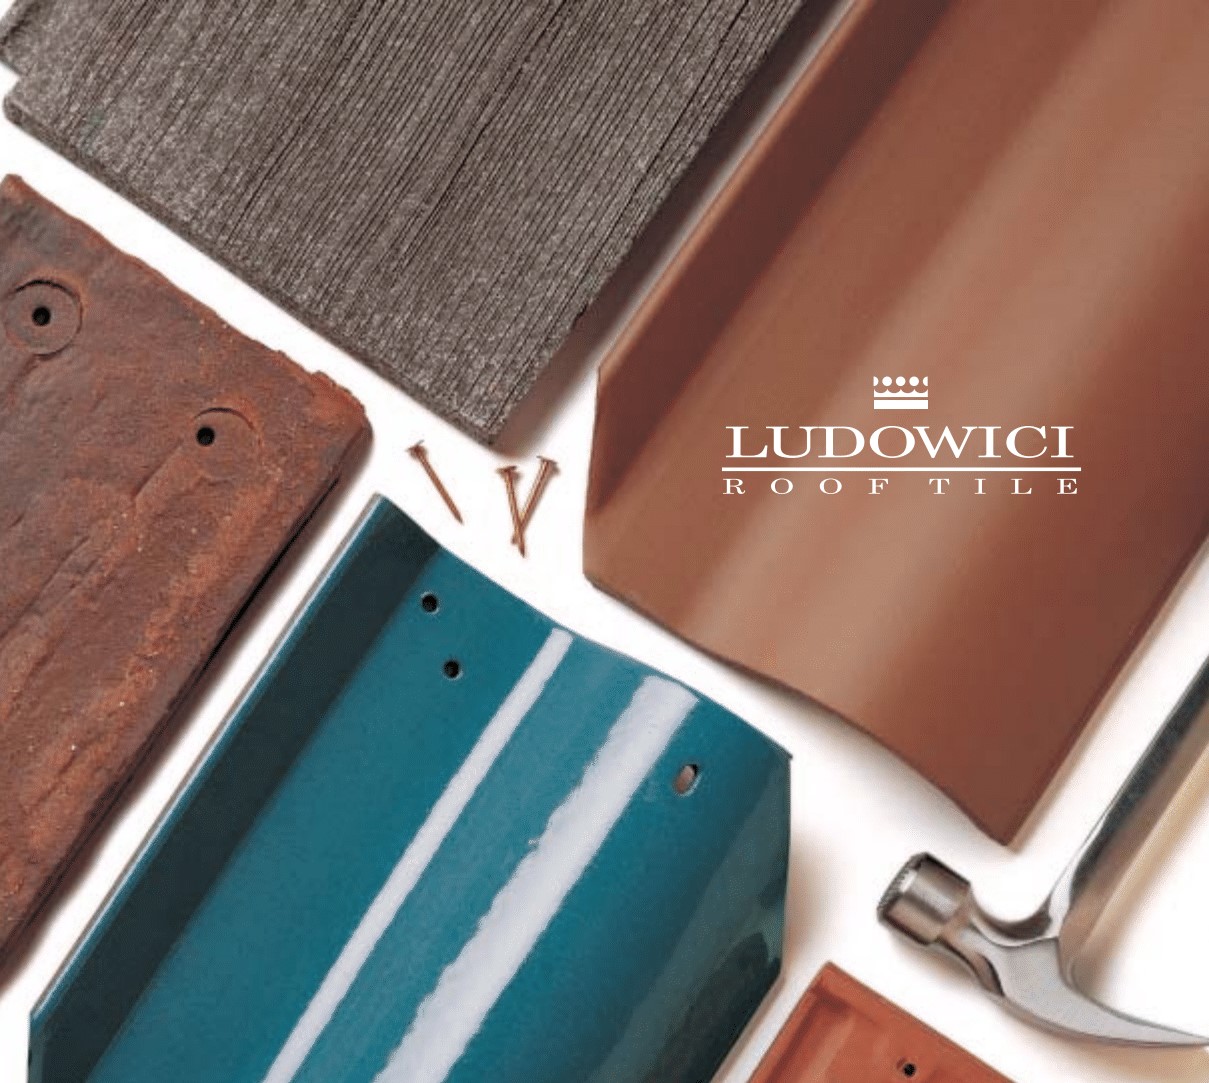 Name changed to just Ludowici Roof Tile